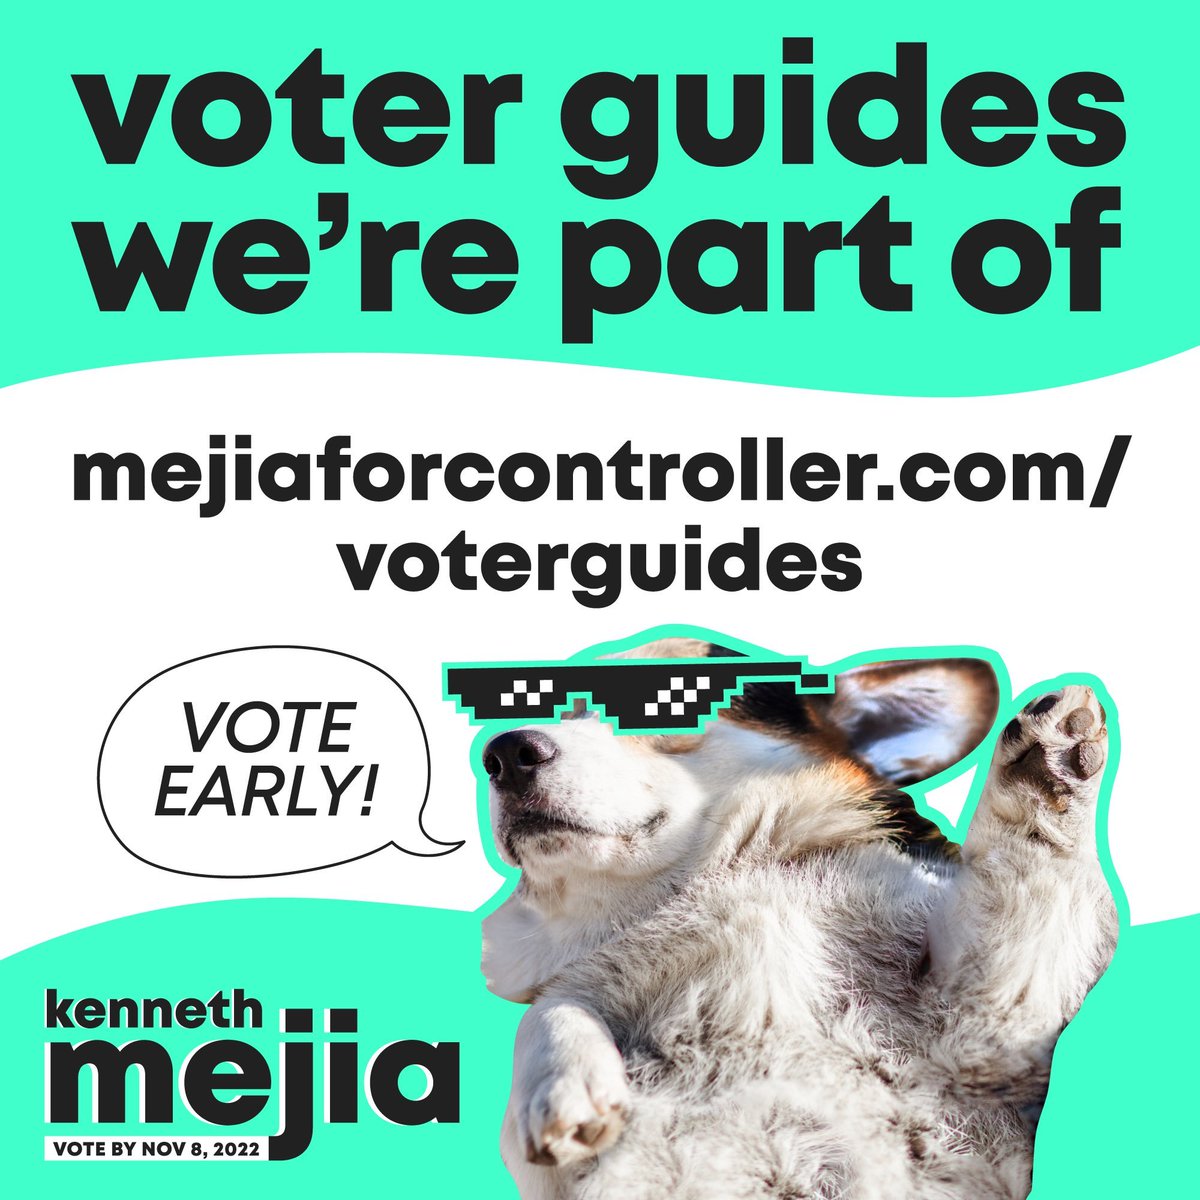 VOTE EARLY! 📢 Find your nearest drop box here: locator.lavote.gov/locations/vbm?… Vote centers open Oct 29 to Nov 8! Find your nearest vote center here: locator.lavote.gov/locations/vc?c… Here are some voter guides we're part of: mejiaforcontroller.com/voterguides/